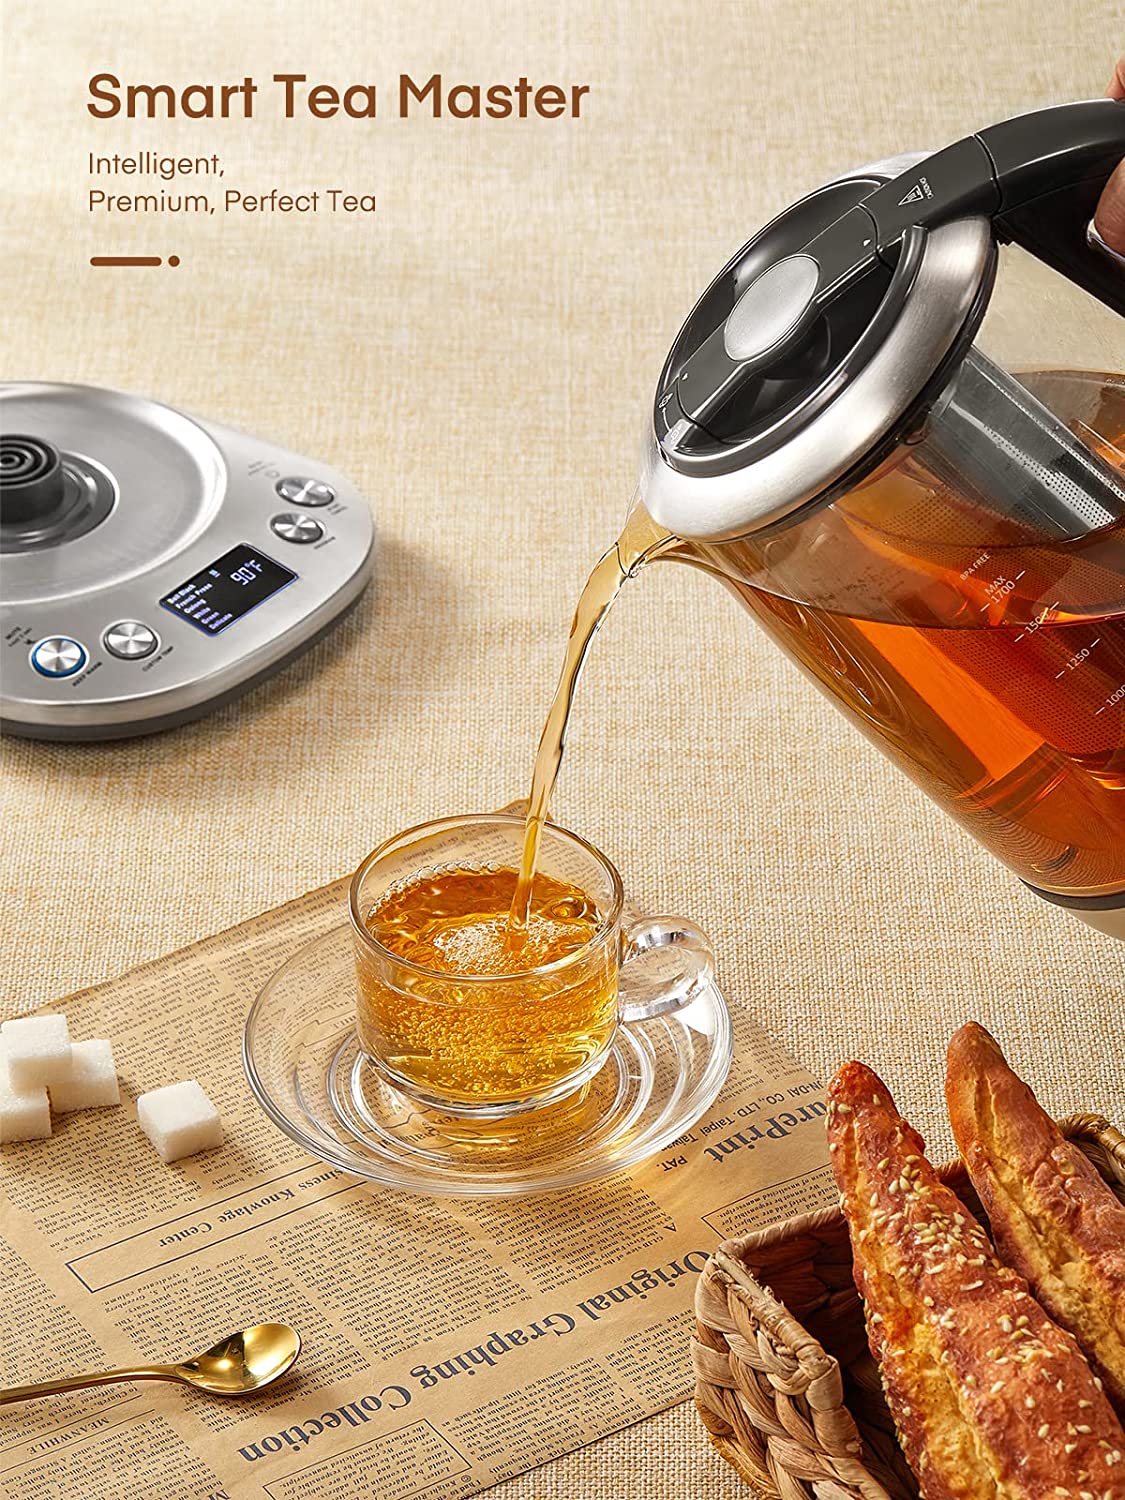 smart tea master, Tea Kettle Electric, FOHERE Electric Kettle Temperature Control with 6 Presets, 2Hr Keep Warm, Removable Tea Infuser, Stainless Steel Glass Boiler, BPA Free, 1.7L